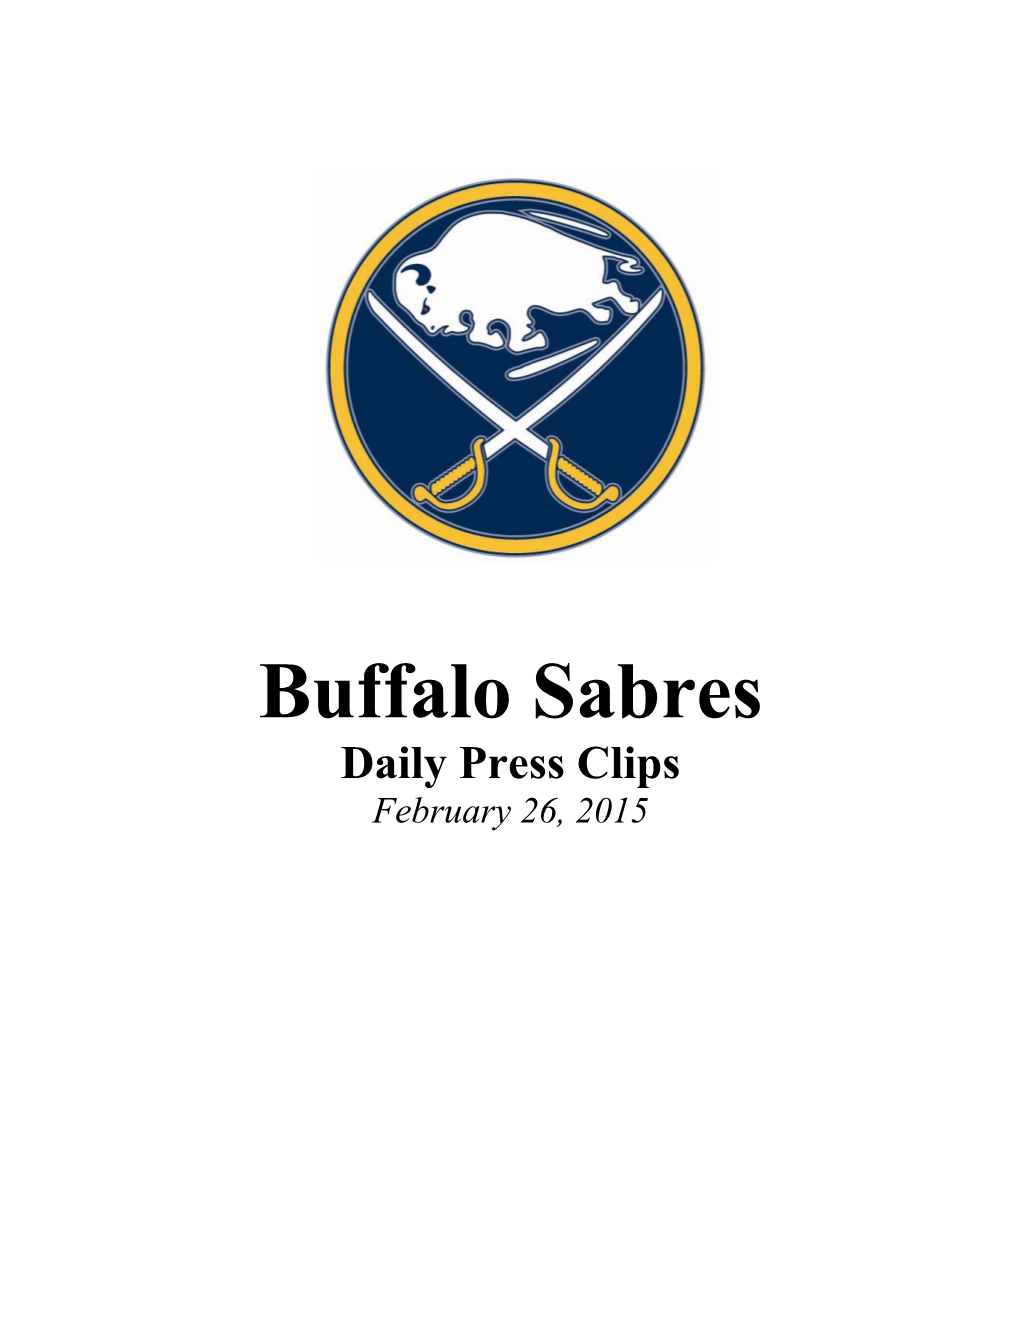 Daily Press Clips February 26, 2015